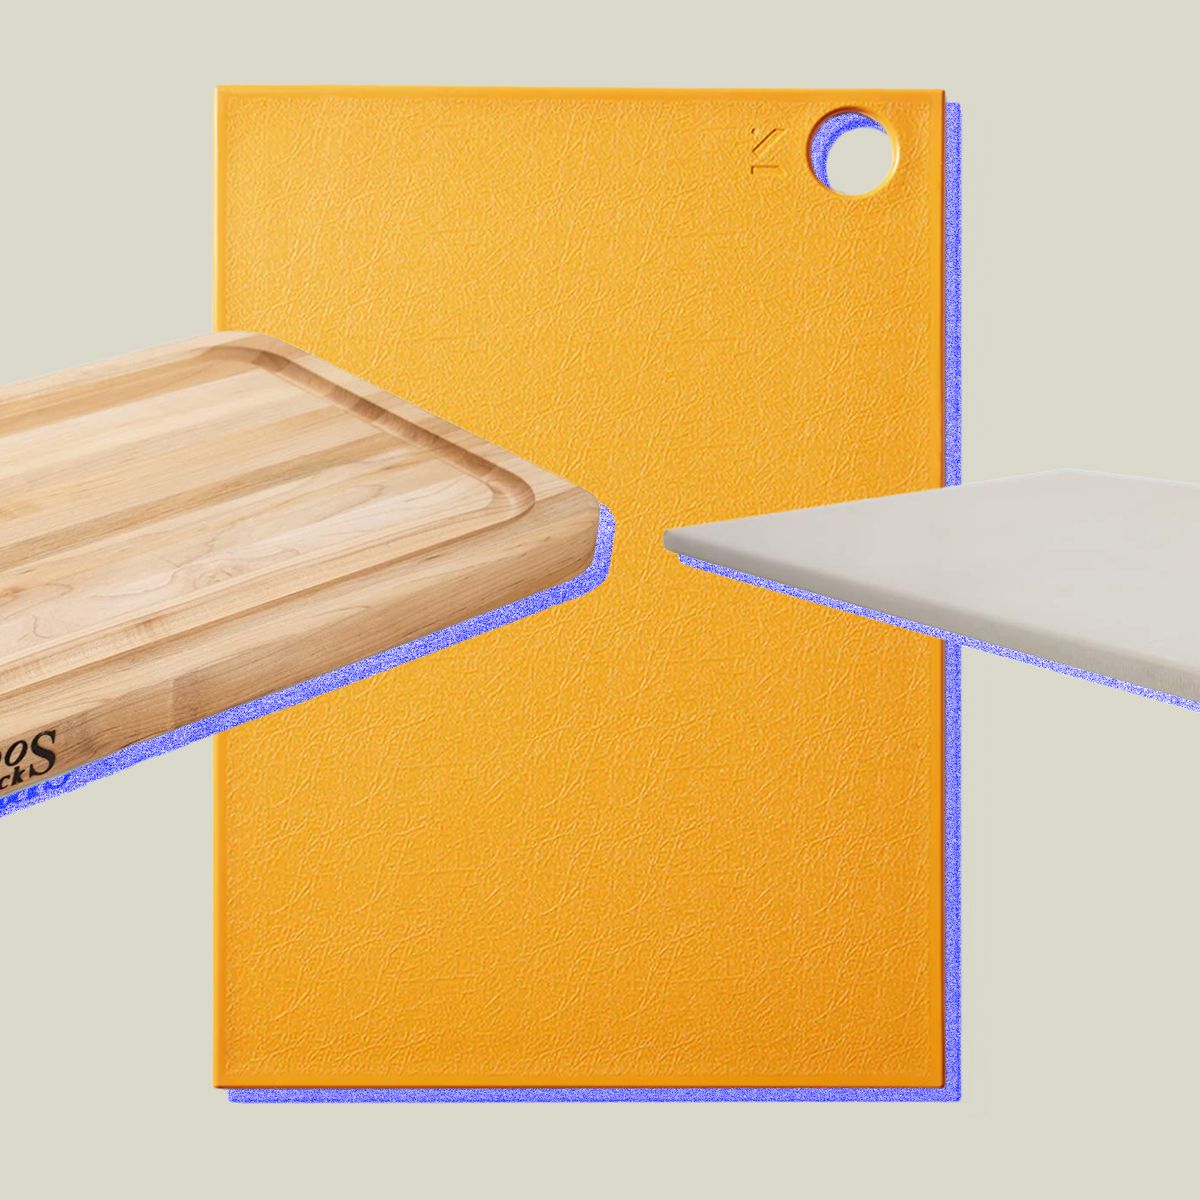 Cutting Board Comparison: Is Wood or Plastic Better?